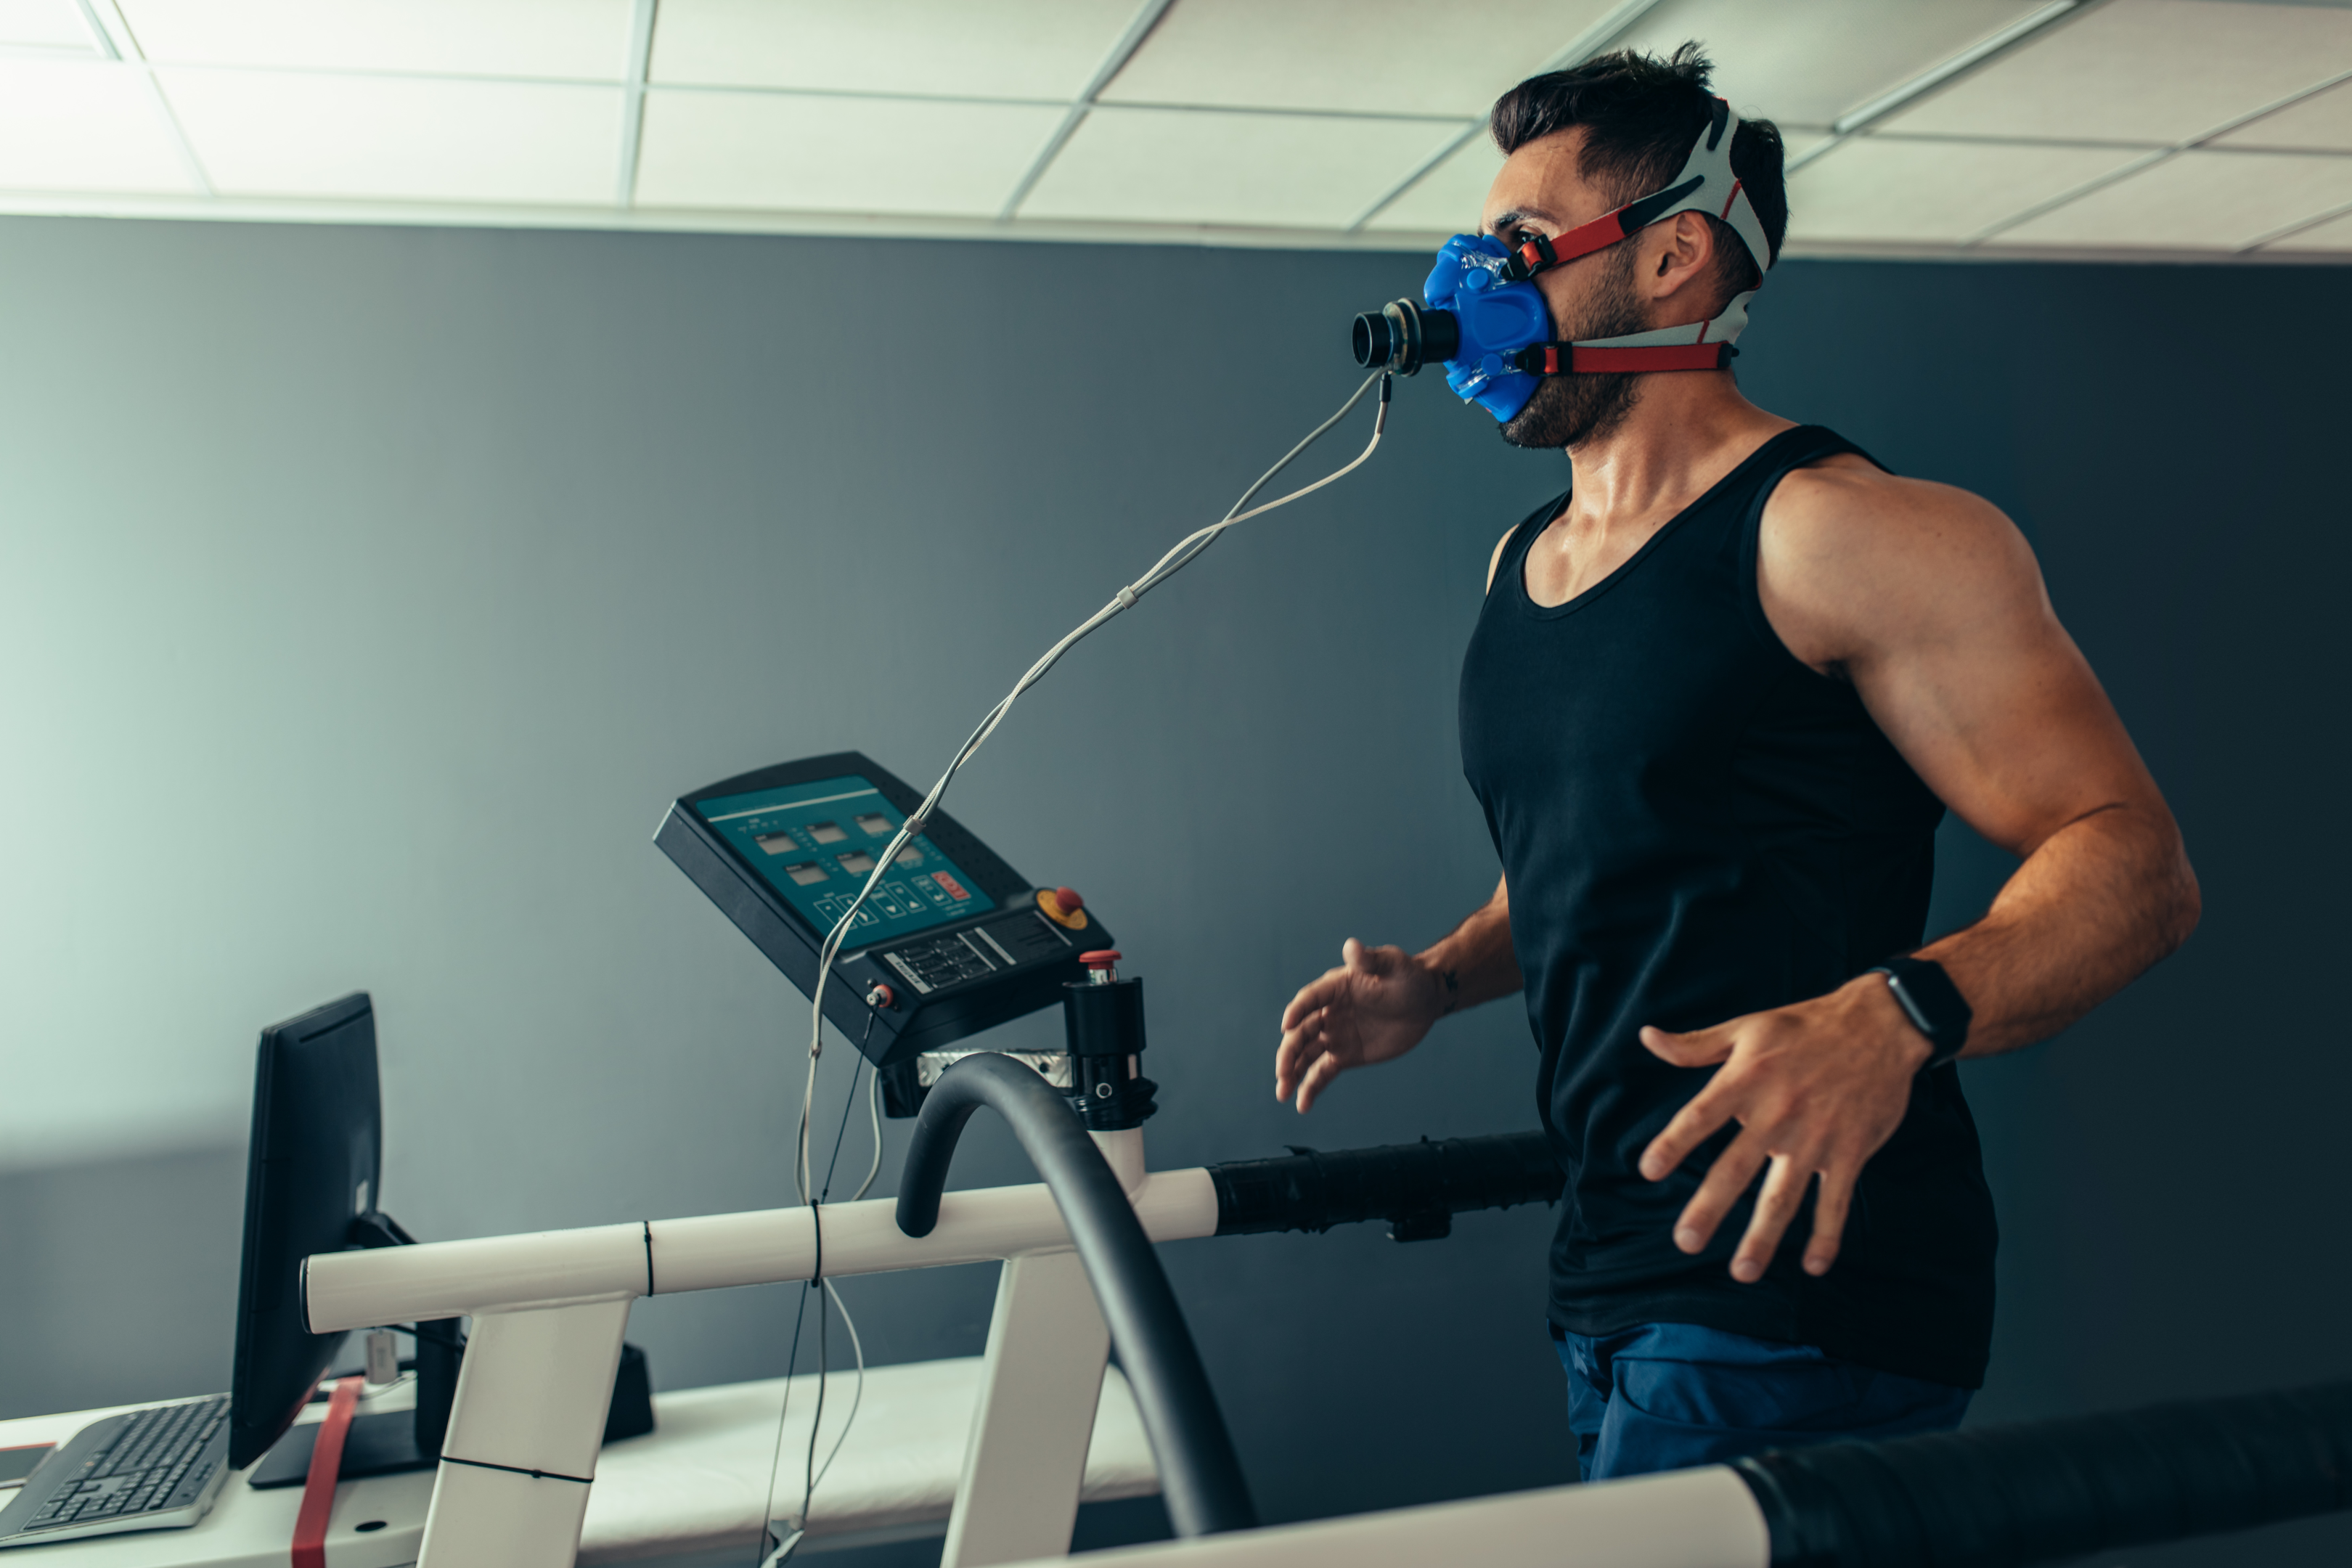 It's unclear if designated researchers are exploring inflammation, THC, caffeine, all use together for workout plans. We cannot say THC reduces inflammation, but a few studies may show a reduction in pain. This might translate into aiding sore muscles as well.